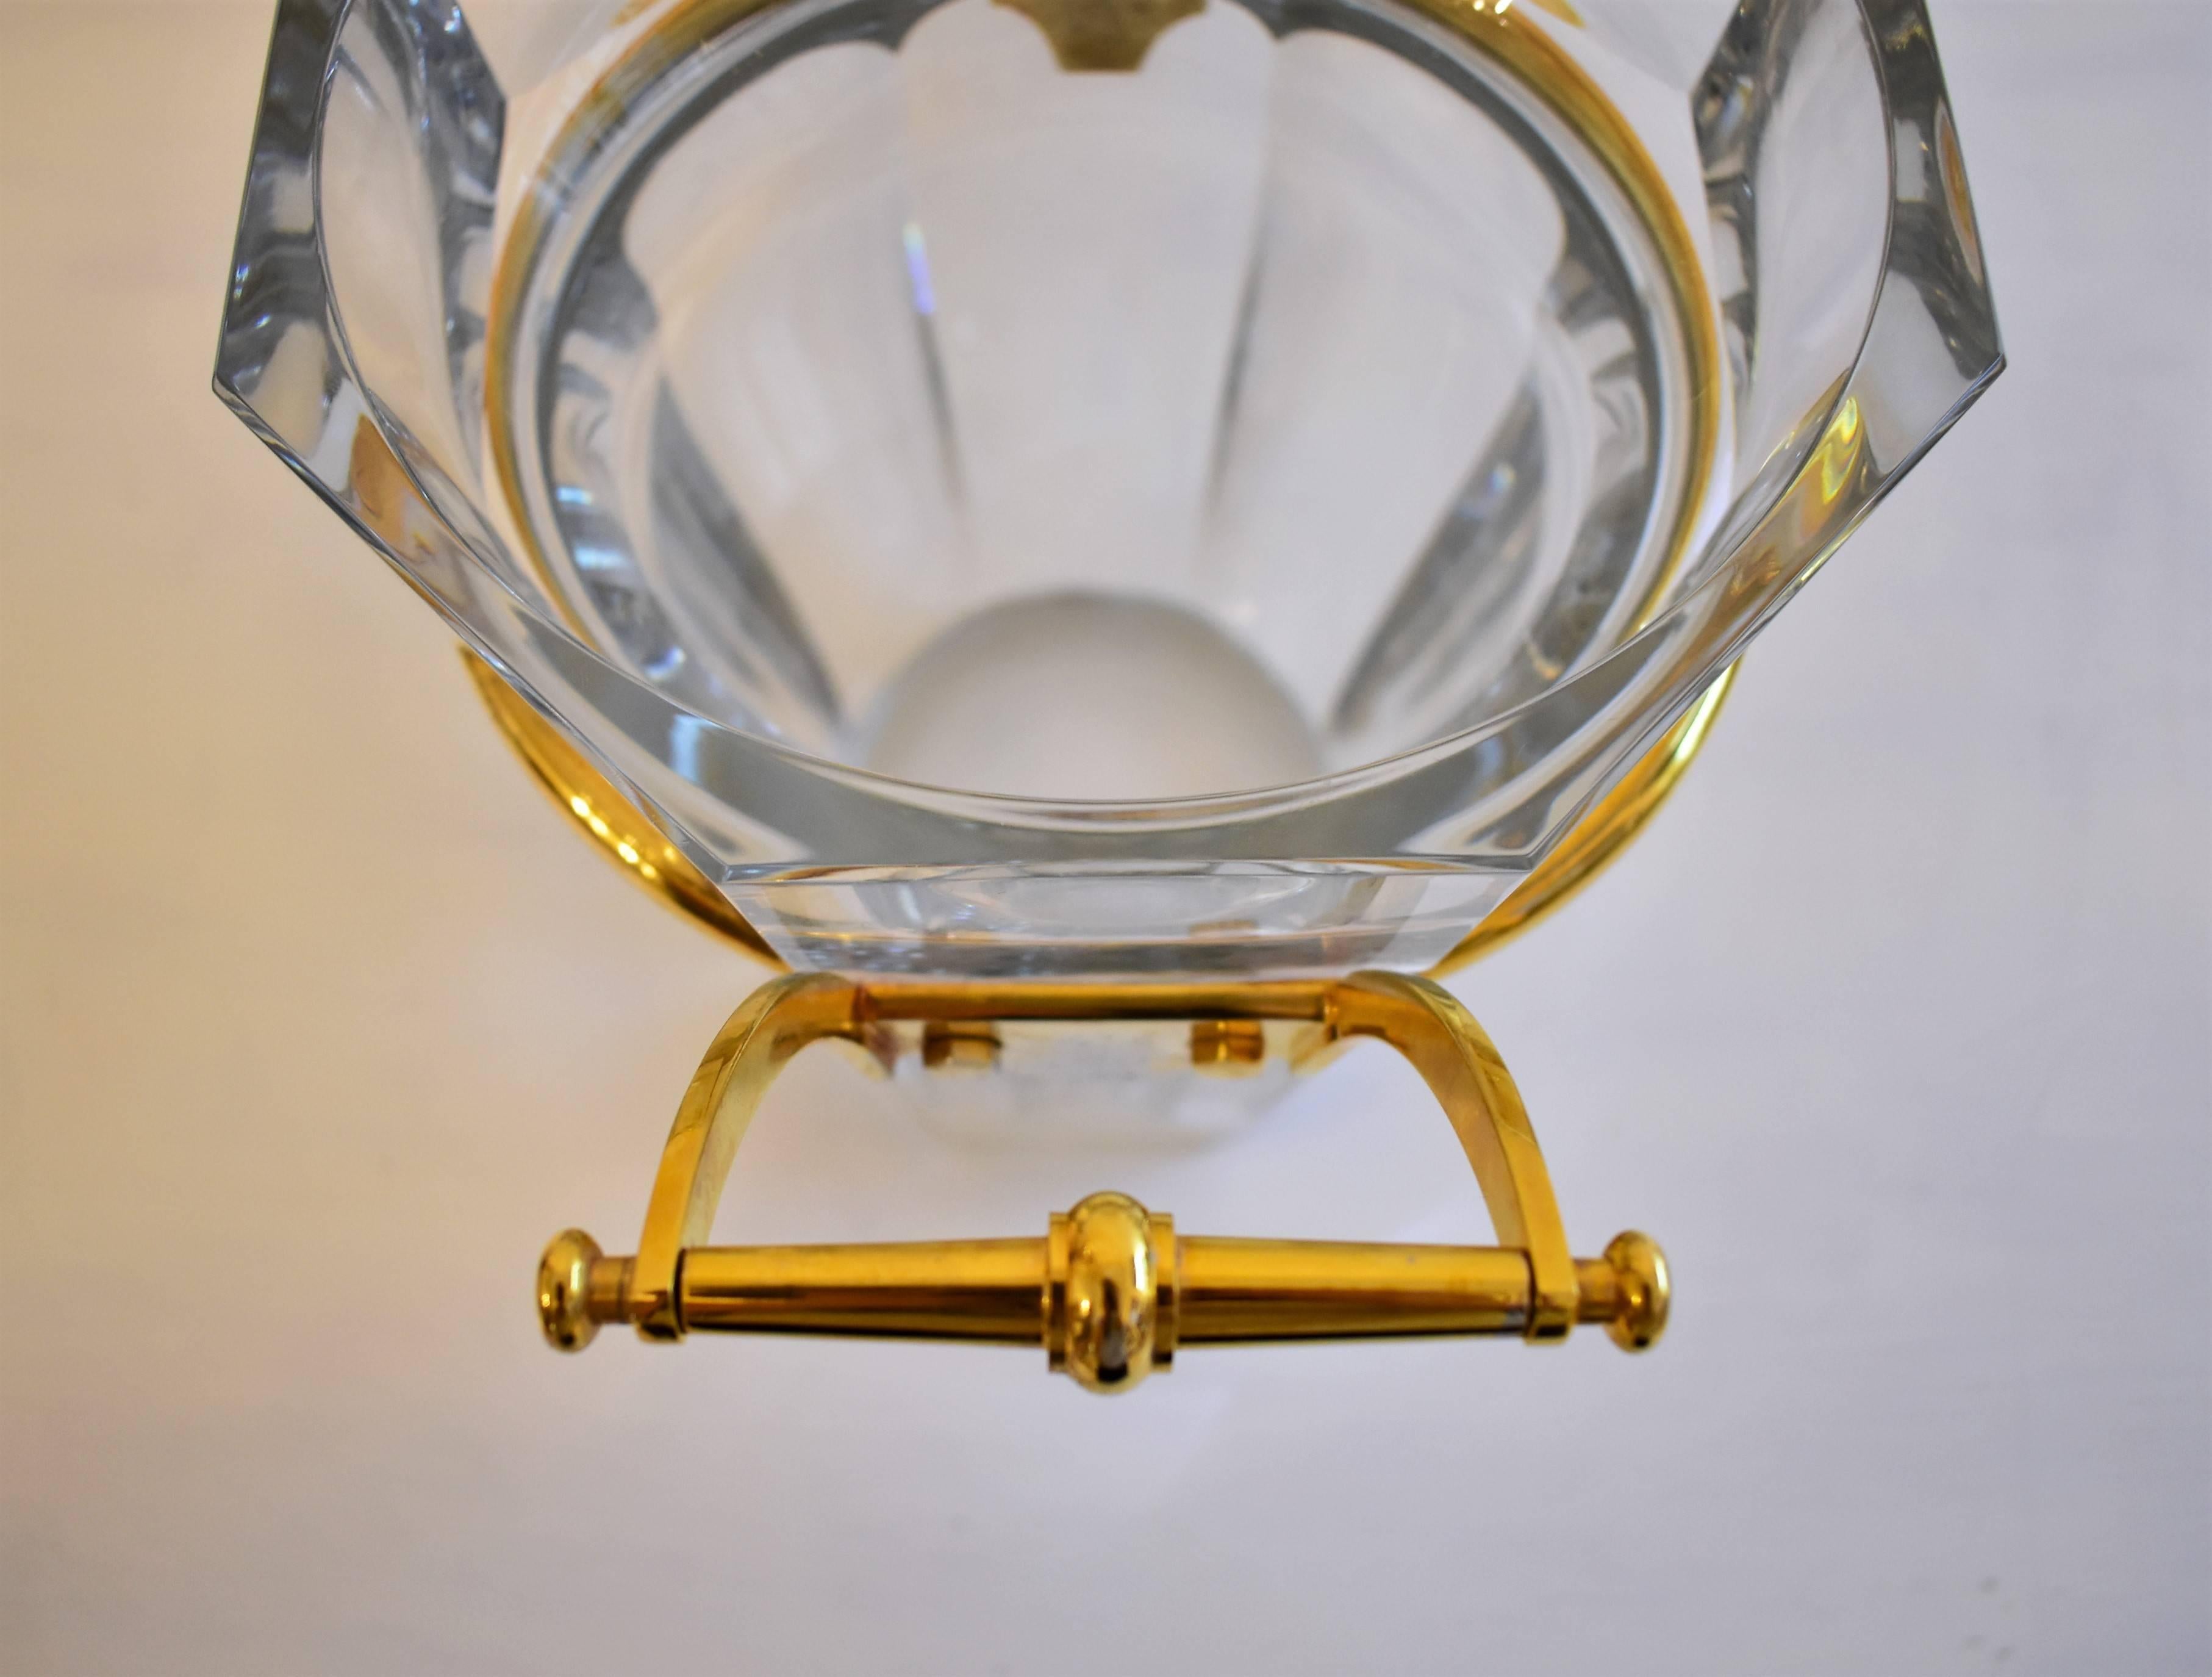 Faceted Baccarat Cut Crystal Modern Harcourt Champagne Cooler, Gilded Handles For Sale